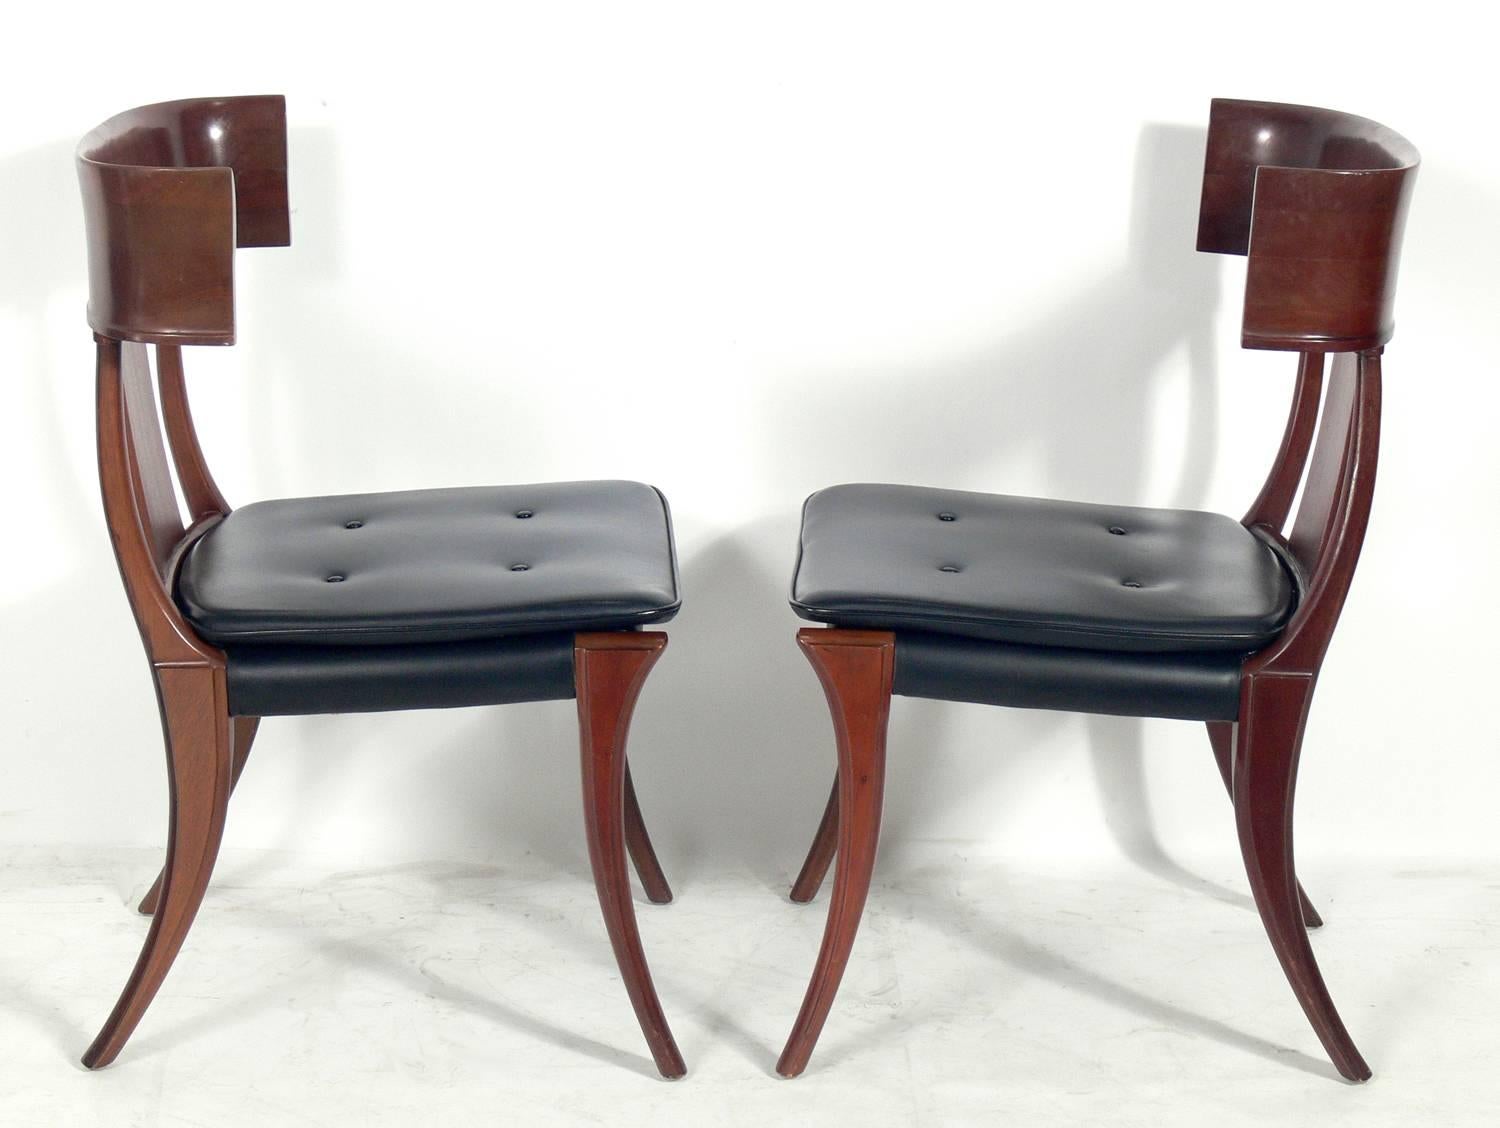 Pair of curvaceous walnut Klismos chairs, in the manner of T.H. Robsjohn Gibbings, American, circa 1960s. Gibbings was inspired by Classical Greek design. They retain their original black vinyl upholstery, or if you prefer, they can be reupholstered